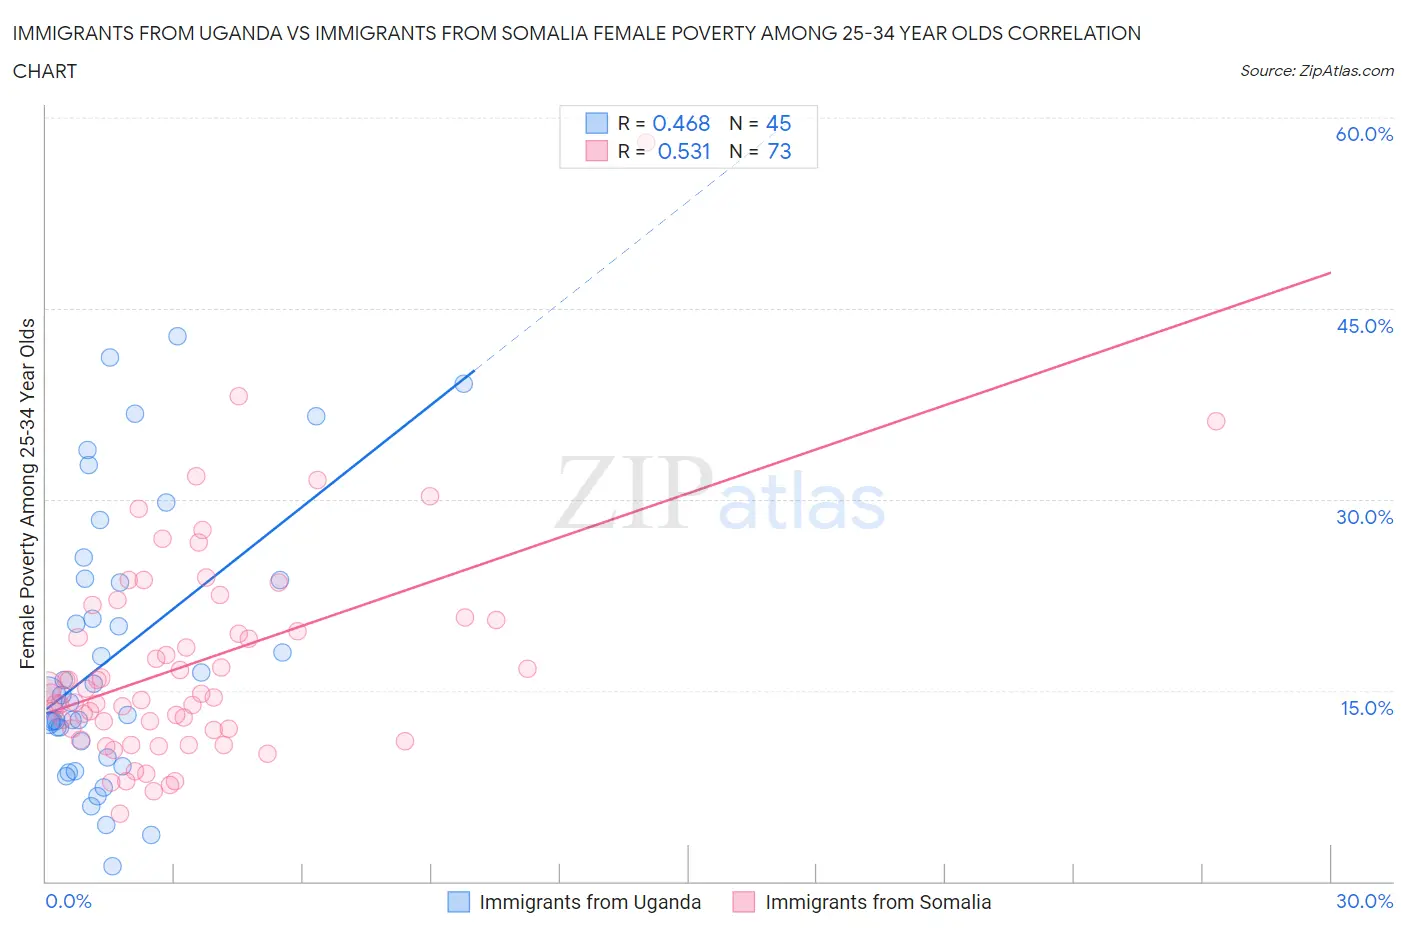 Immigrants from Uganda vs Immigrants from Somalia Female Poverty Among 25-34 Year Olds